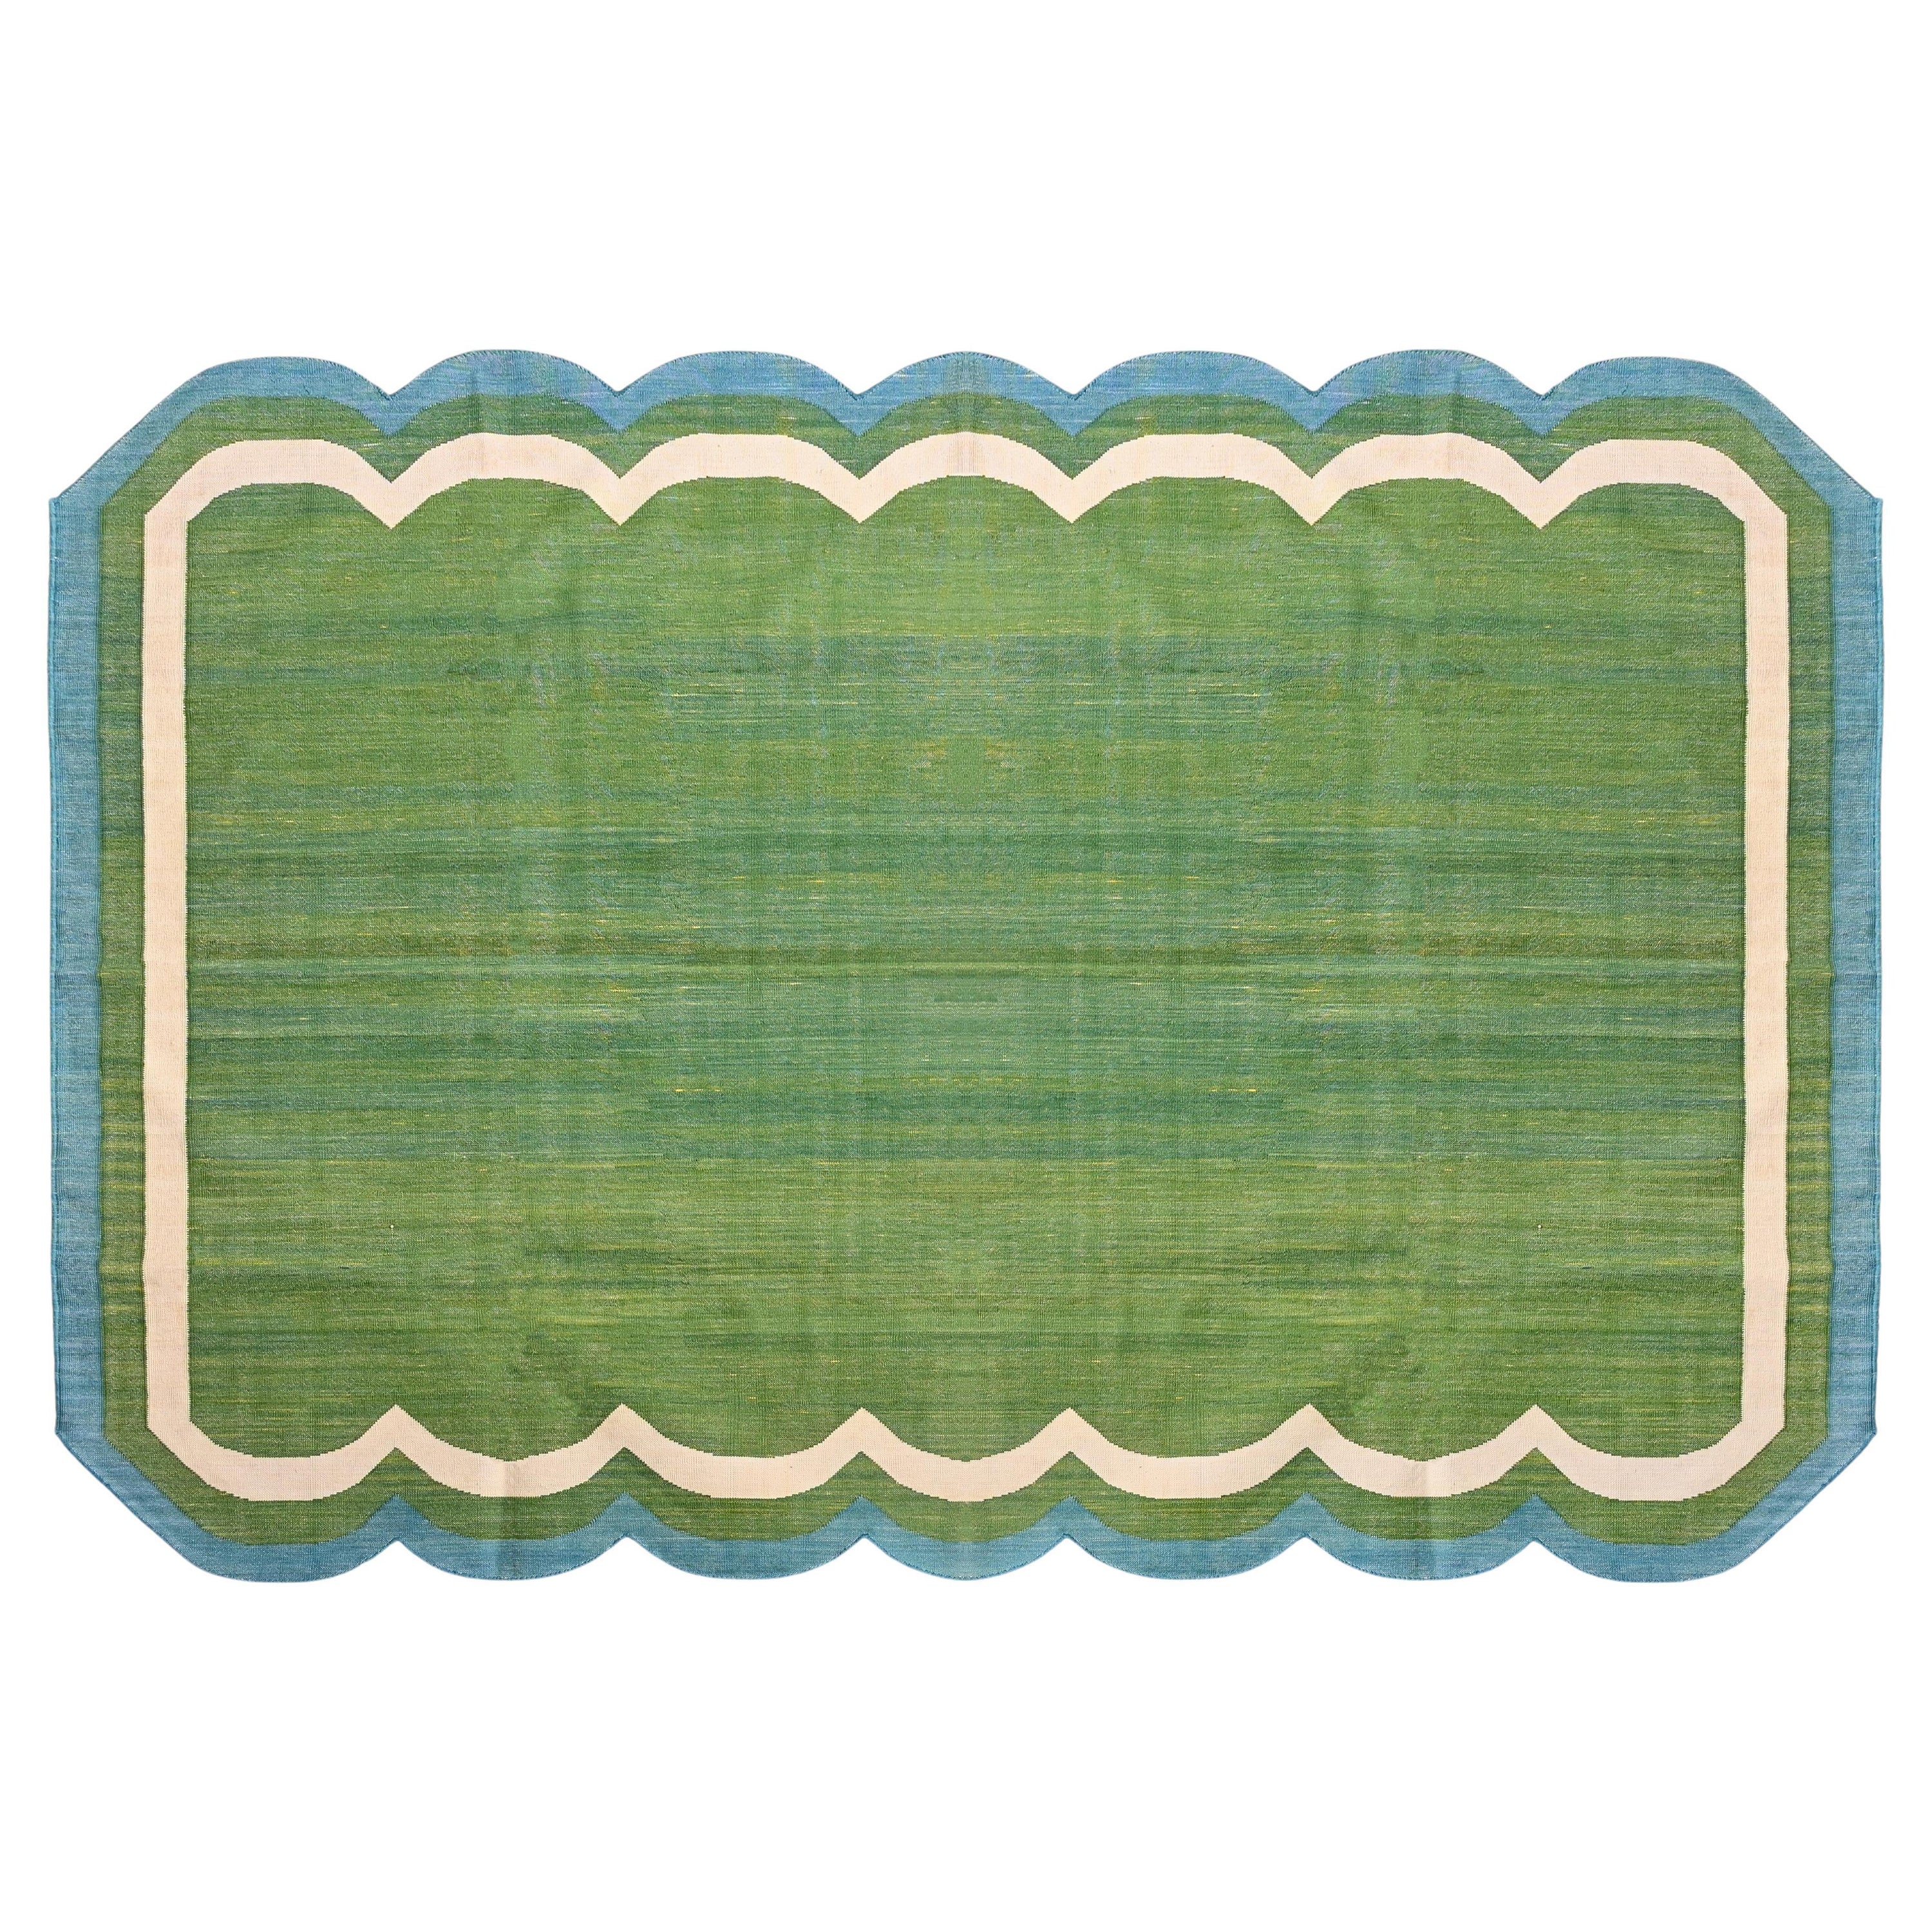 Handmade Cotton Area Flat Weave Rug, 5x7 Green And Blue Scalloped Kilim Dhurrie For Sale